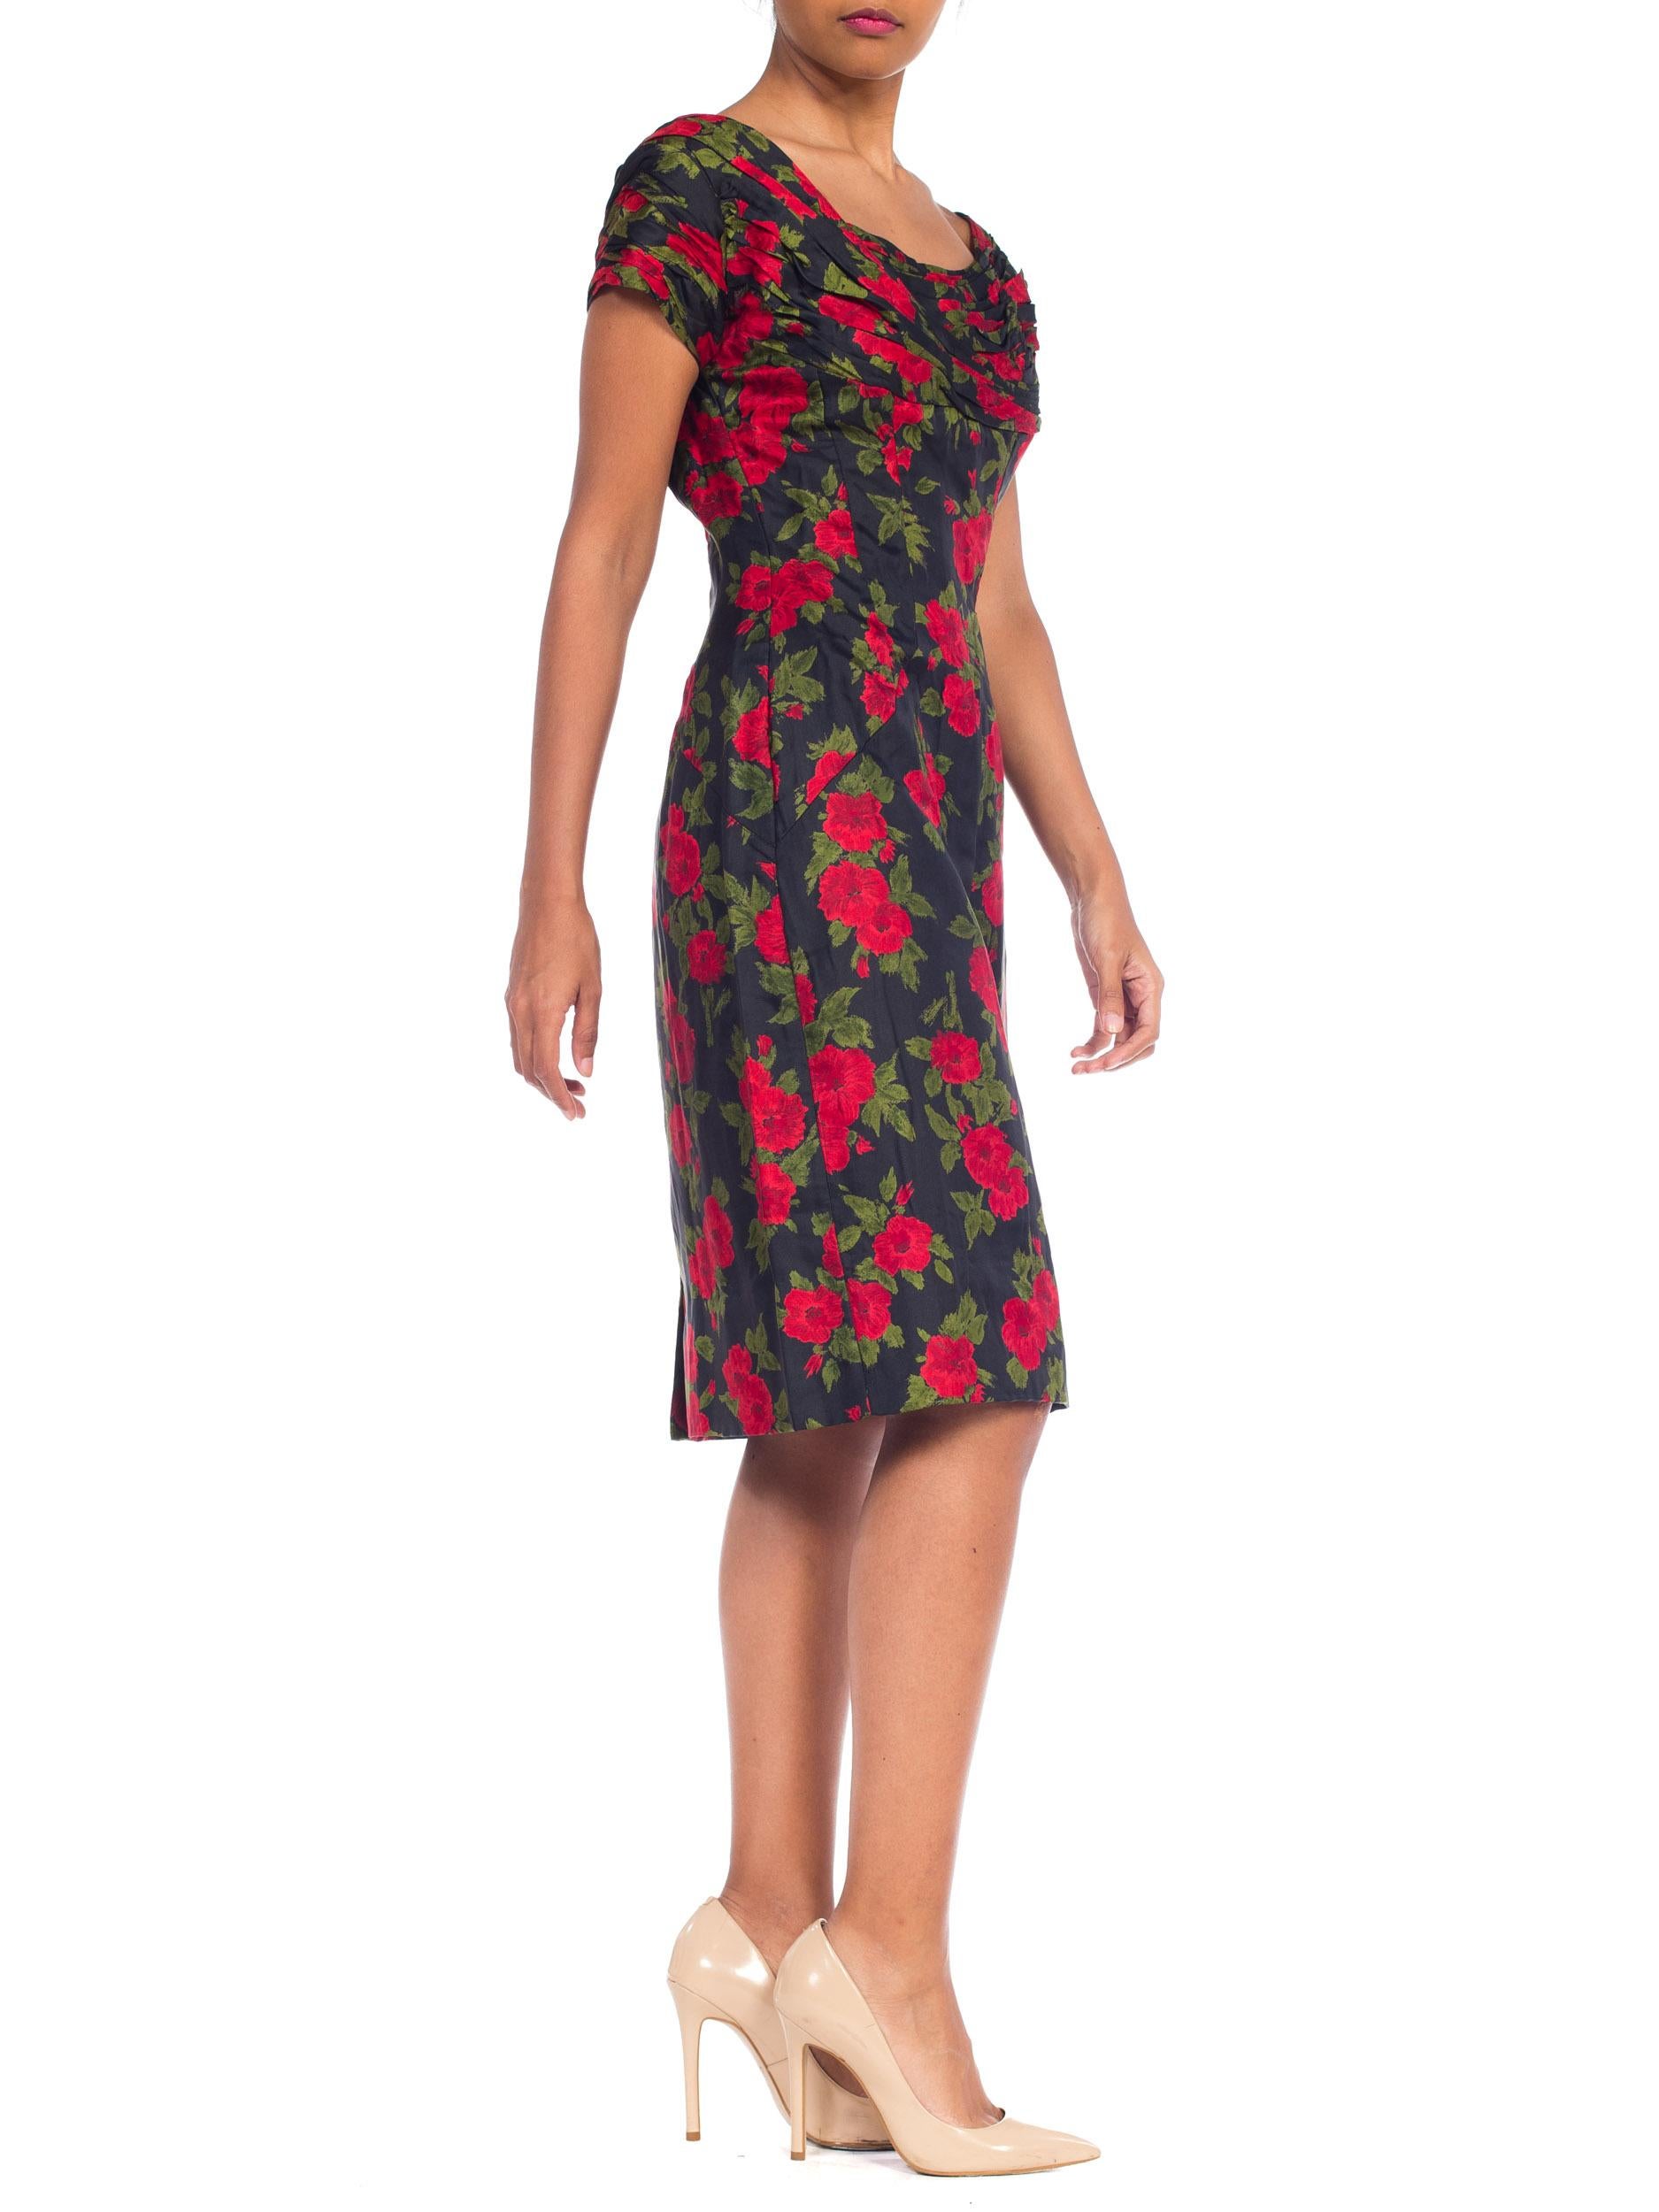 Women's 1950S DOLCE & GABBANA Style Silk Twill Red Black Classic Rose Floral Printed Dr For Sale